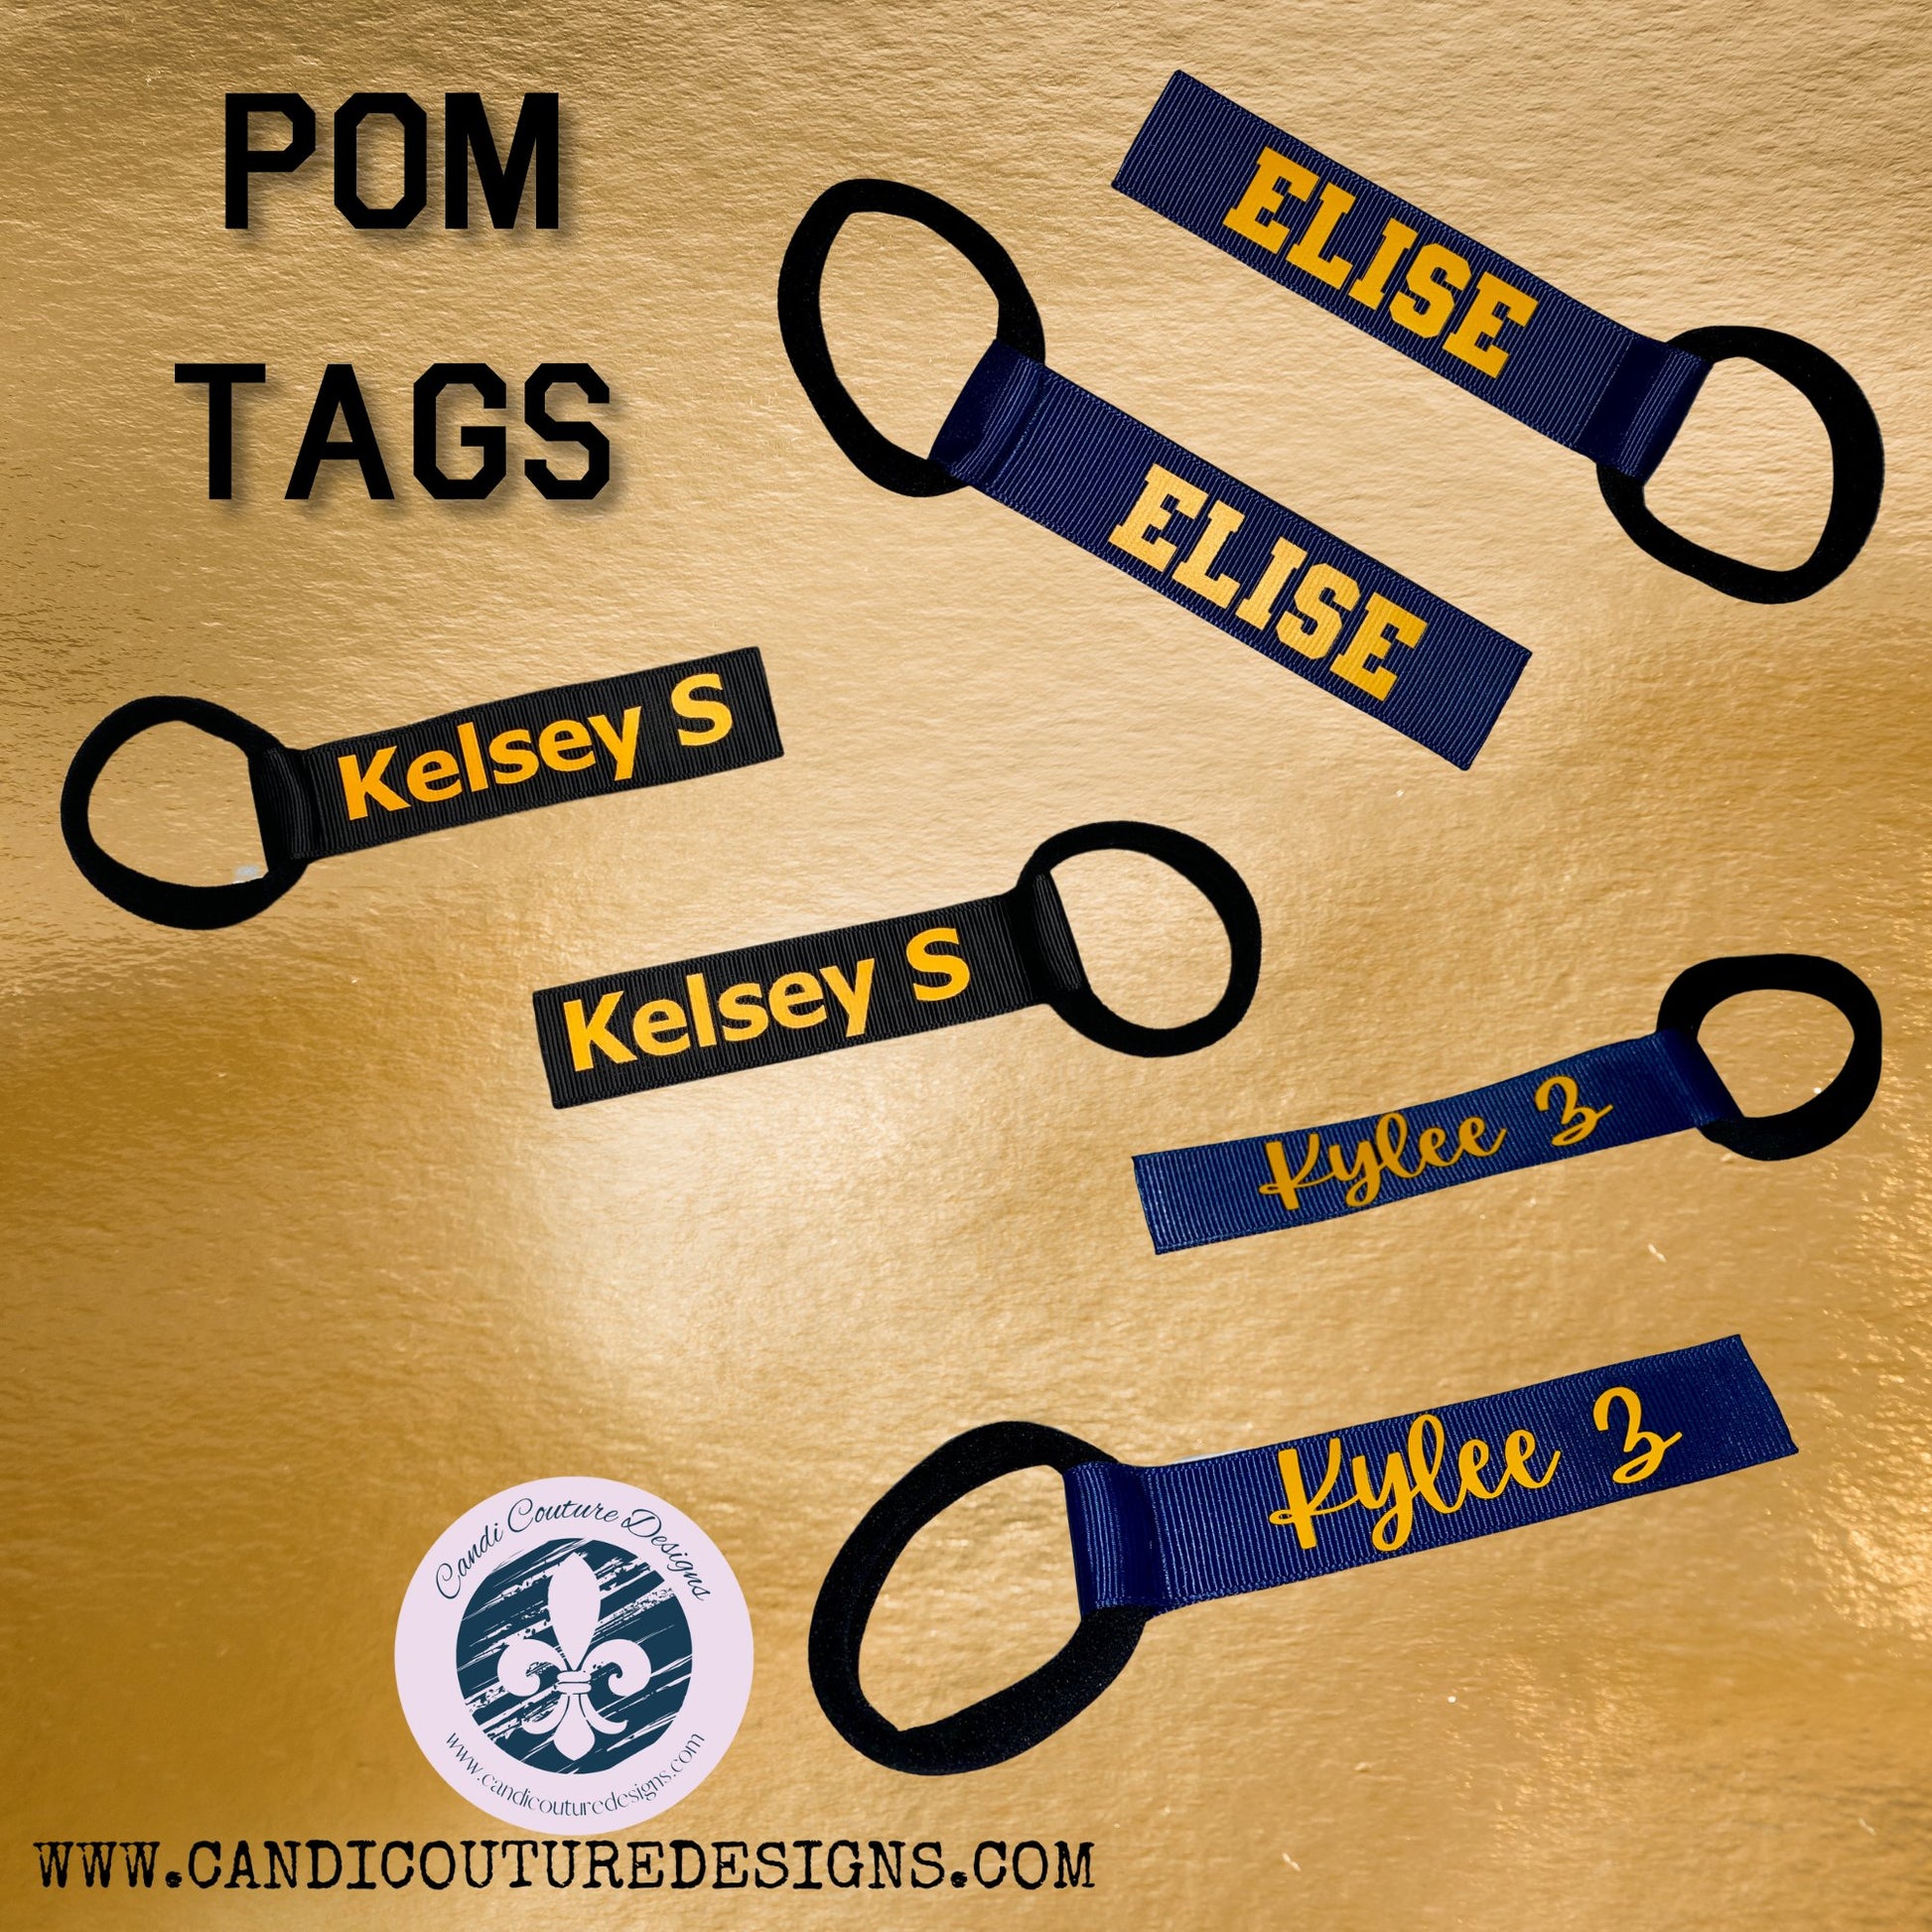 Personalized Pom Tags for Cheerleaders and Dance Teams - Candicouturedesigns